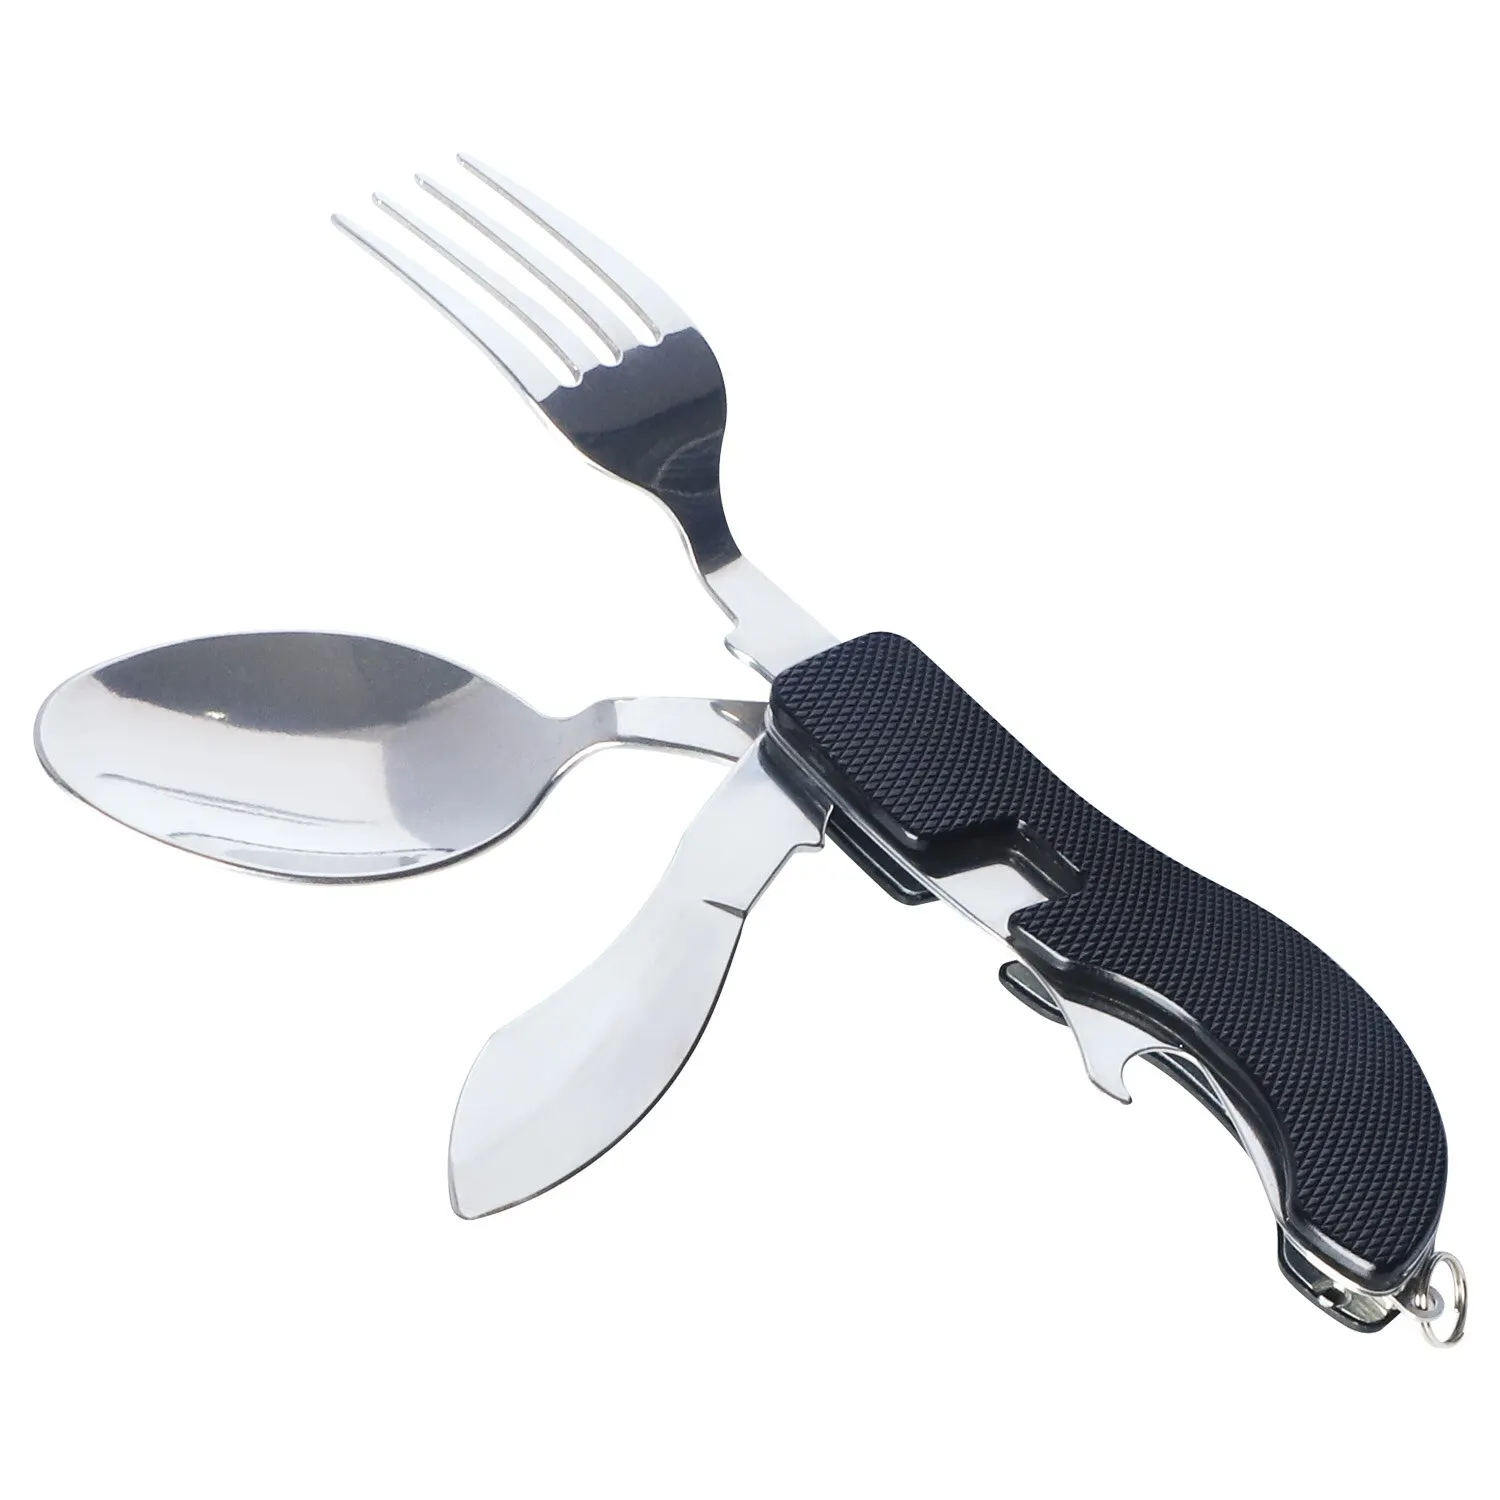 5 in 1 Camping Cutlery Set Folding Tableware Stainless Steel Portable in  case